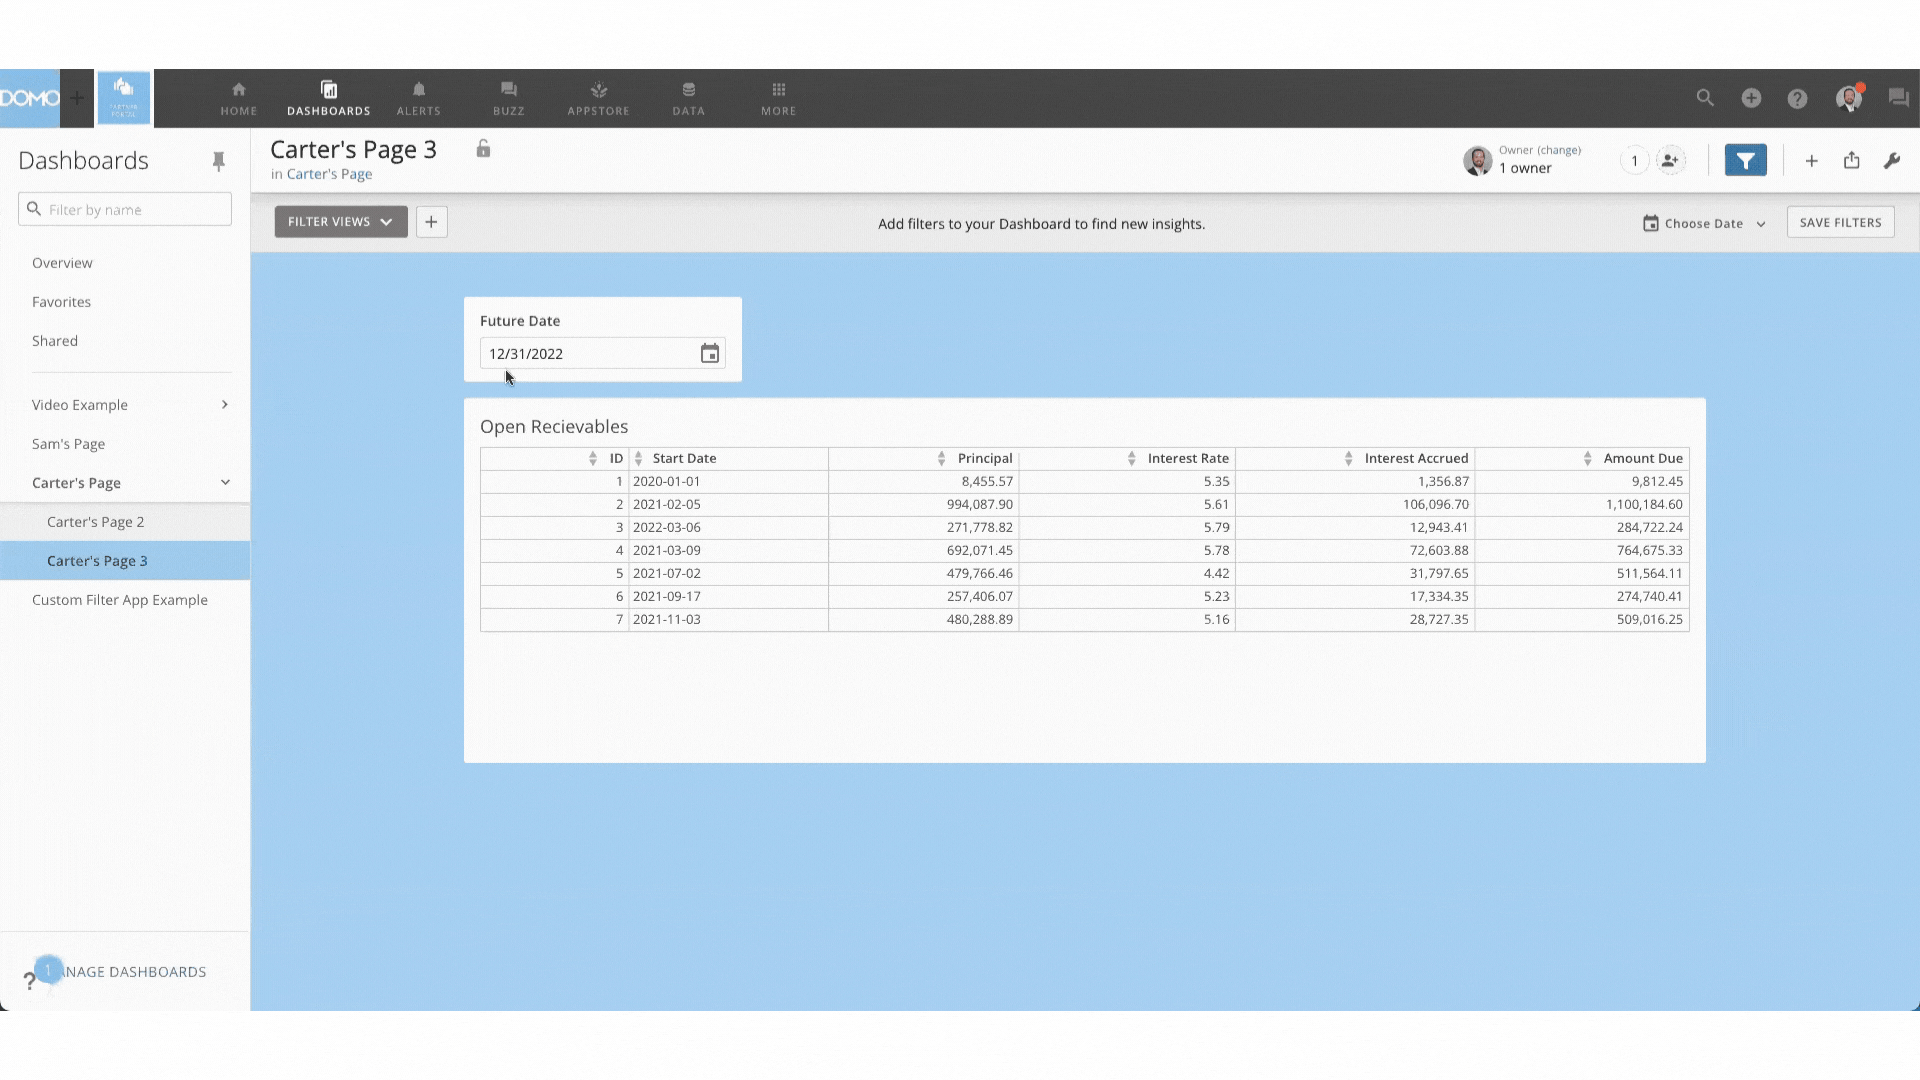 Using Domo Variables to test the amount due and interest accrued for future payment dates